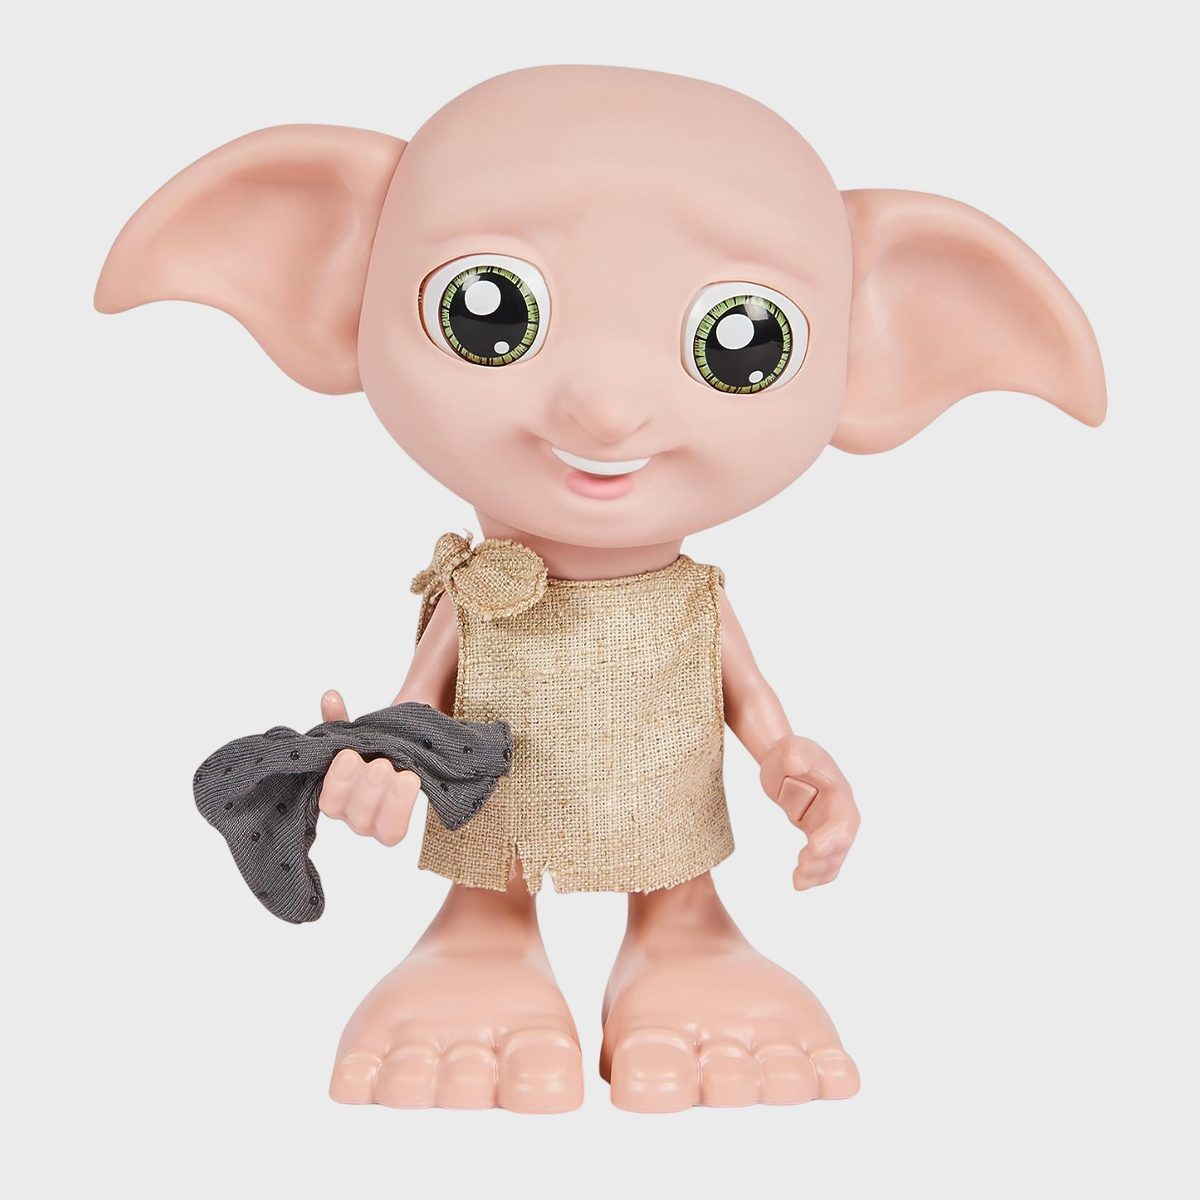 <p>Wizards and muggles alike will quickly fall in love with this <a href="https://www.amazon.com/Wizarding-World-Interactive-Magical-8-5-inch/dp/B0BRQXGWKH" rel="noopener noreferrer">interactive Dobby</a>, which comes to life with realistic features, movements and sounds. Present Dobby with his treasured sock and he'll thank you profusely.</p> <p>Or simply squeeze his hand to see him blink and react with more sounds and actions including moving his head and ears while lifting his arms up and down! Then see how much your little muggle knows about their favorite series with these <a href="https://www.rd.com/list/harry-potter-quiz/" rel="noopener noreferrer">Harry Potter trivia questions</a>.</p> <p class="listicle-page__cta-button-shop"><a class="shop-btn" href="https://www.amazon.com/Wizarding-World-Interactive-Magical-8-5-inch/dp/B0BRQXGWKH/">Shop Now</a></p>